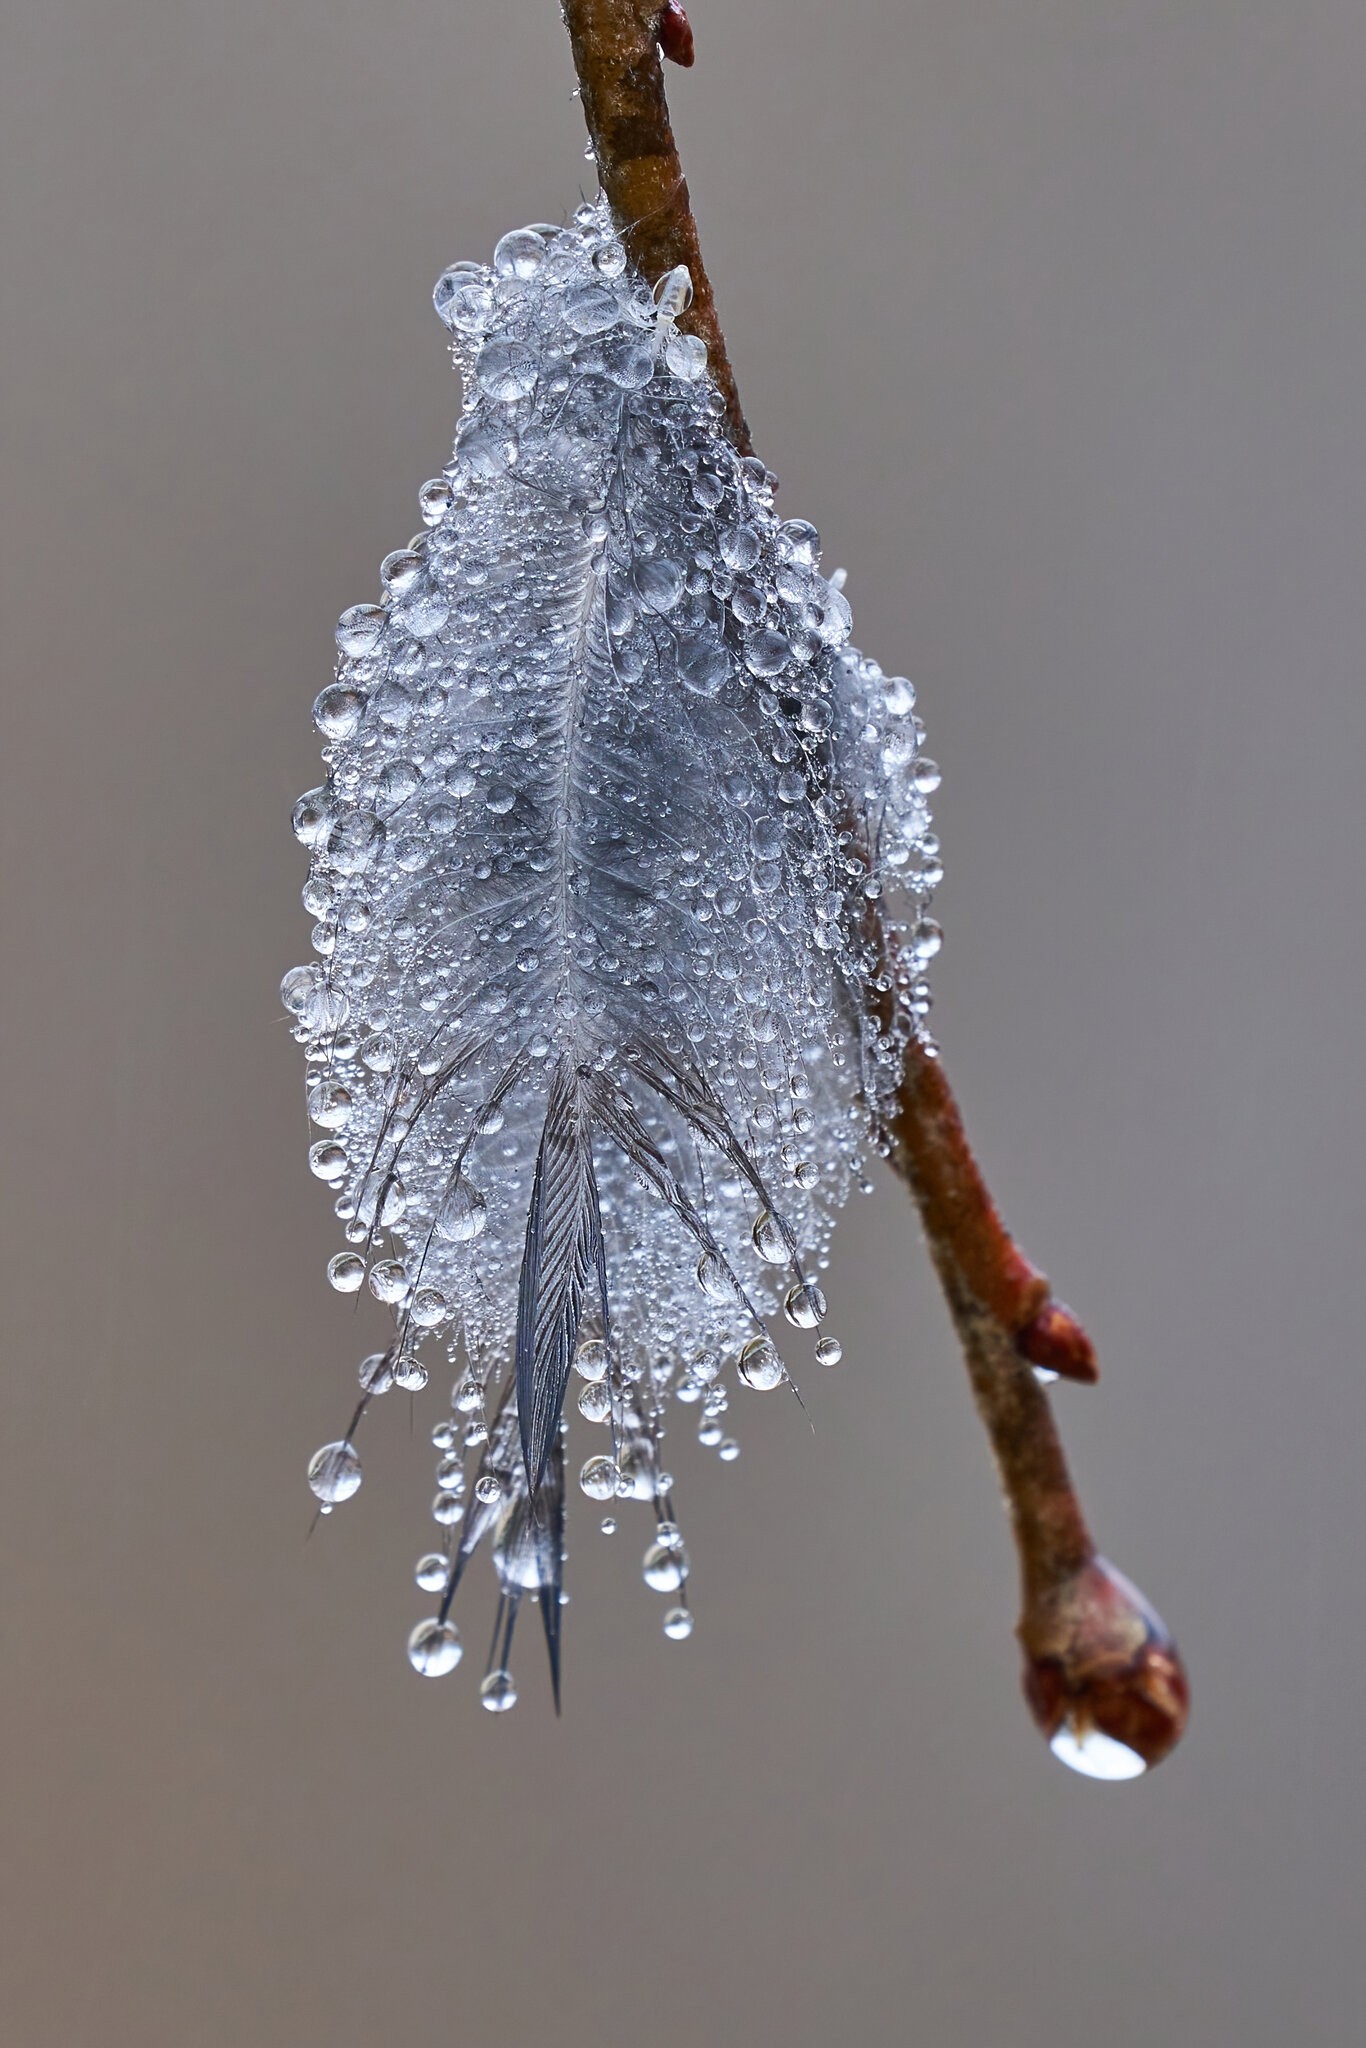 Water droplets  on a feather - Home - 12312022 - 02-DN.jpg